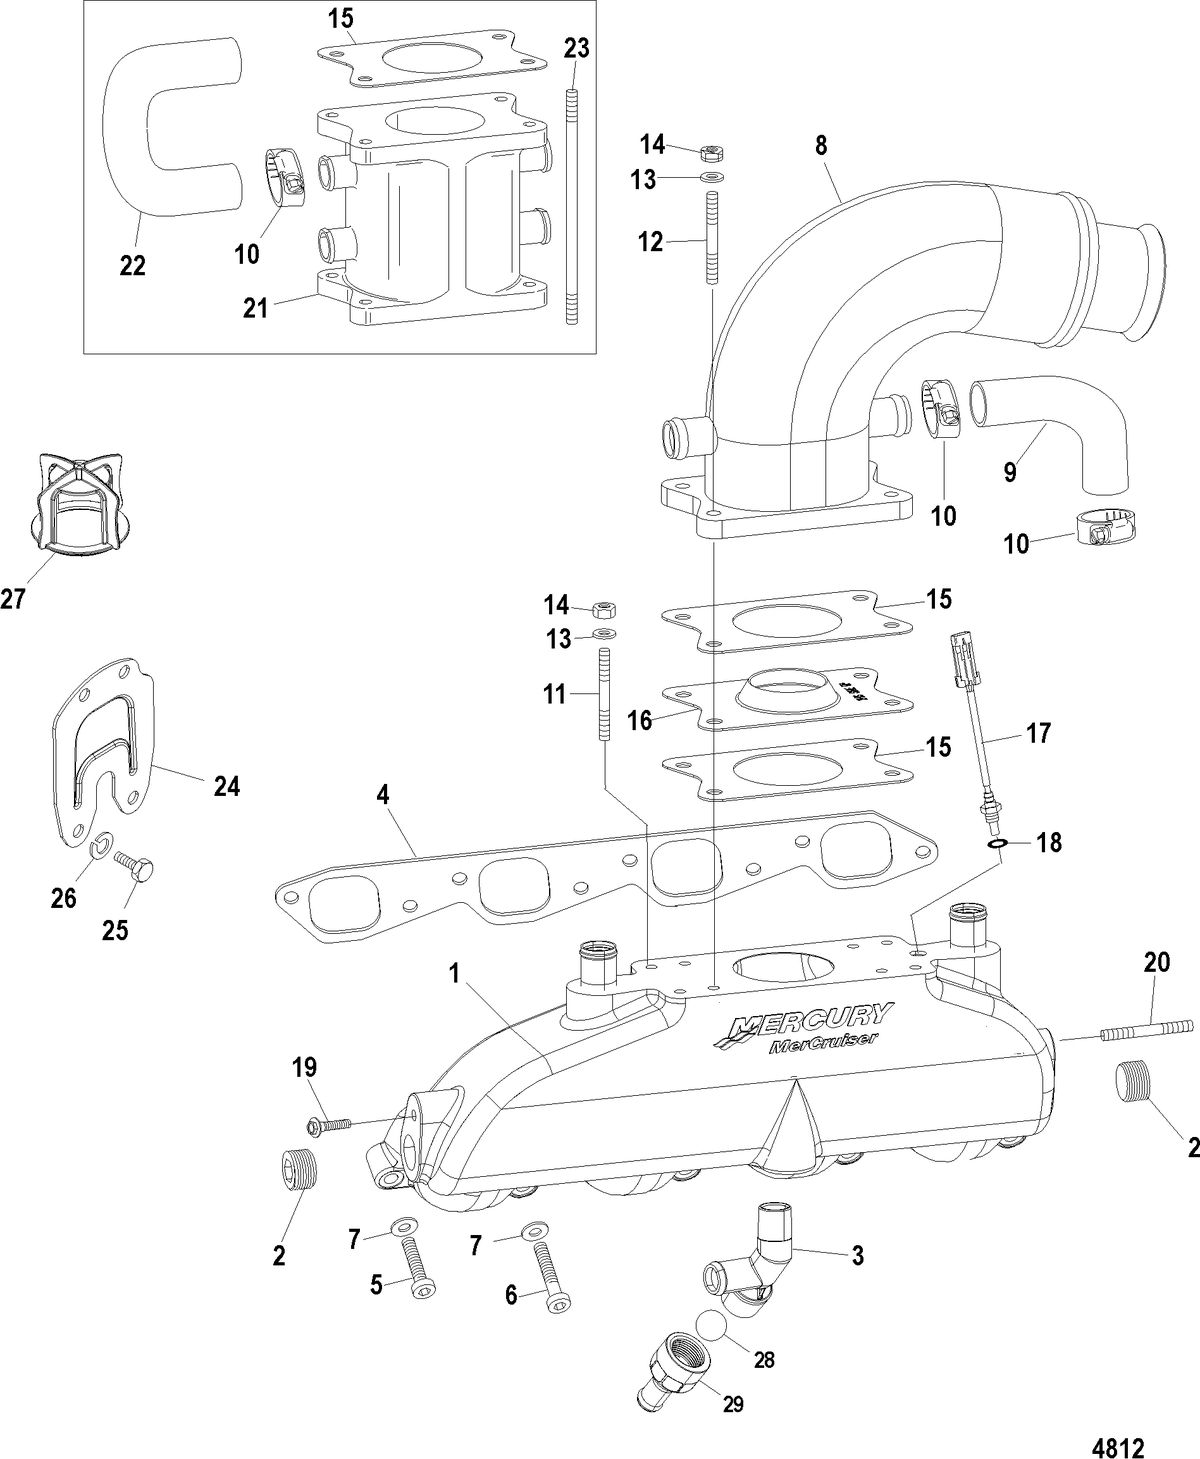 MERCRUISER 496 MAG. STERNDRIVE EXHAUST MANIFOLD(W/O WATER RAIL), ELBOW, AND RISER